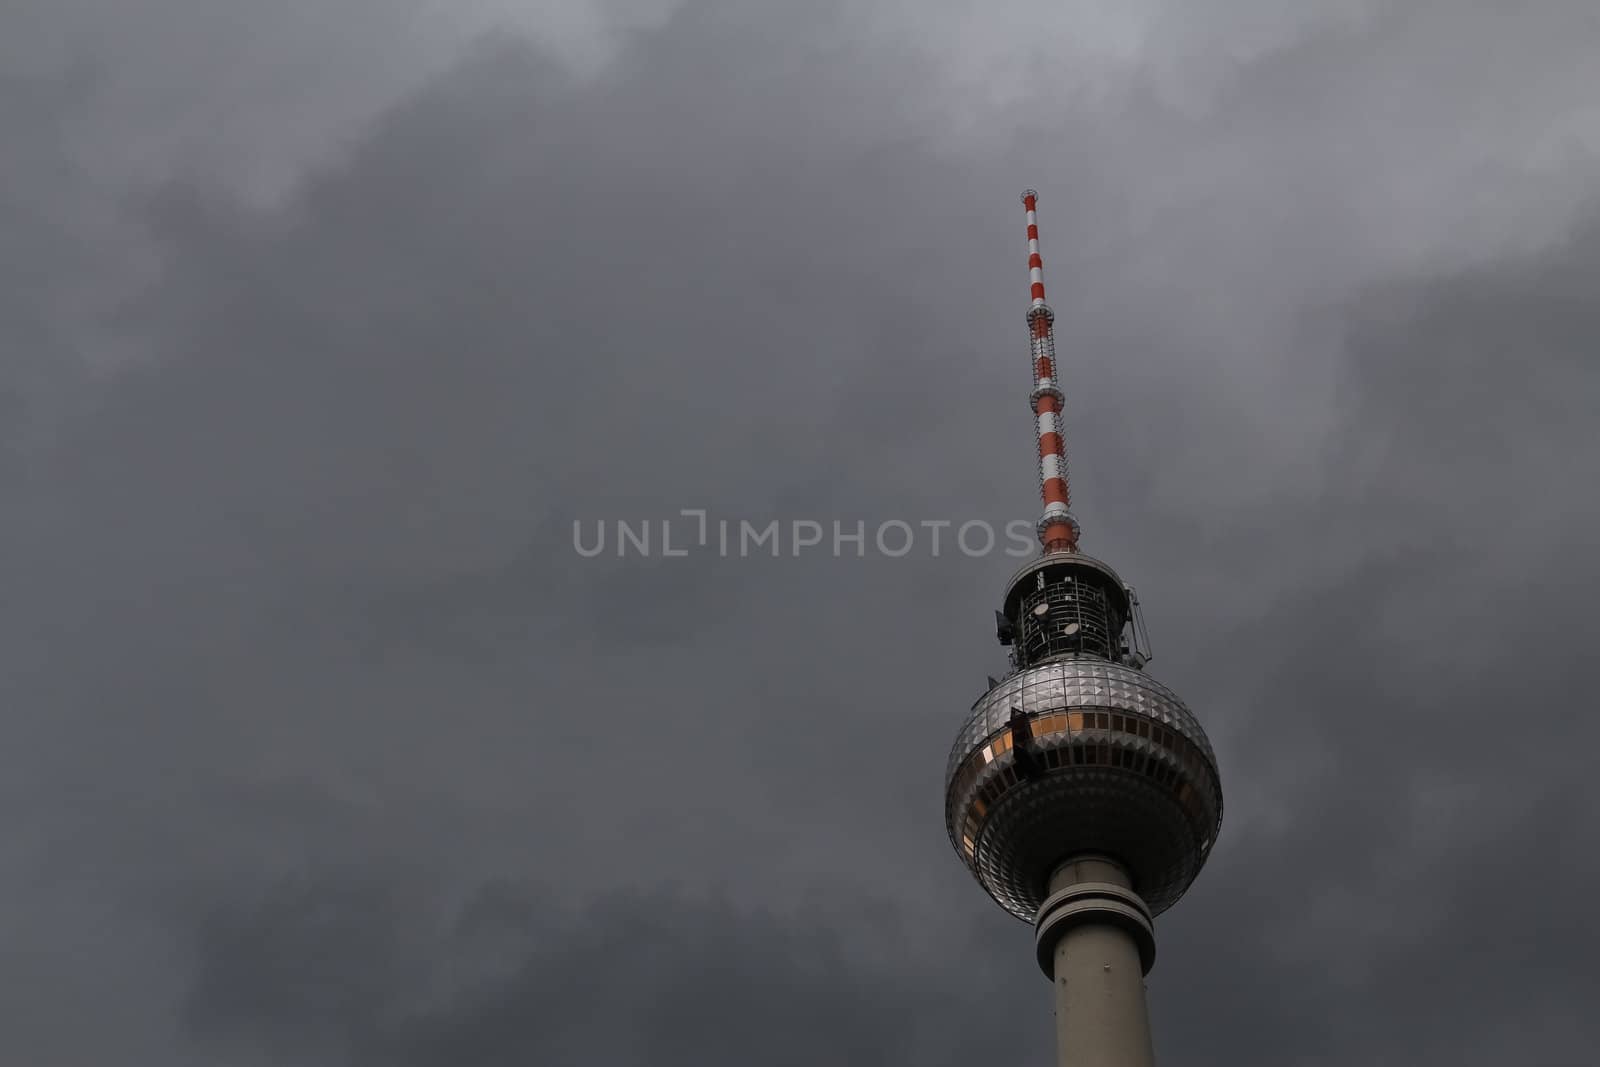 Berlin's broadcasting tower threatened by a storm by kyrien